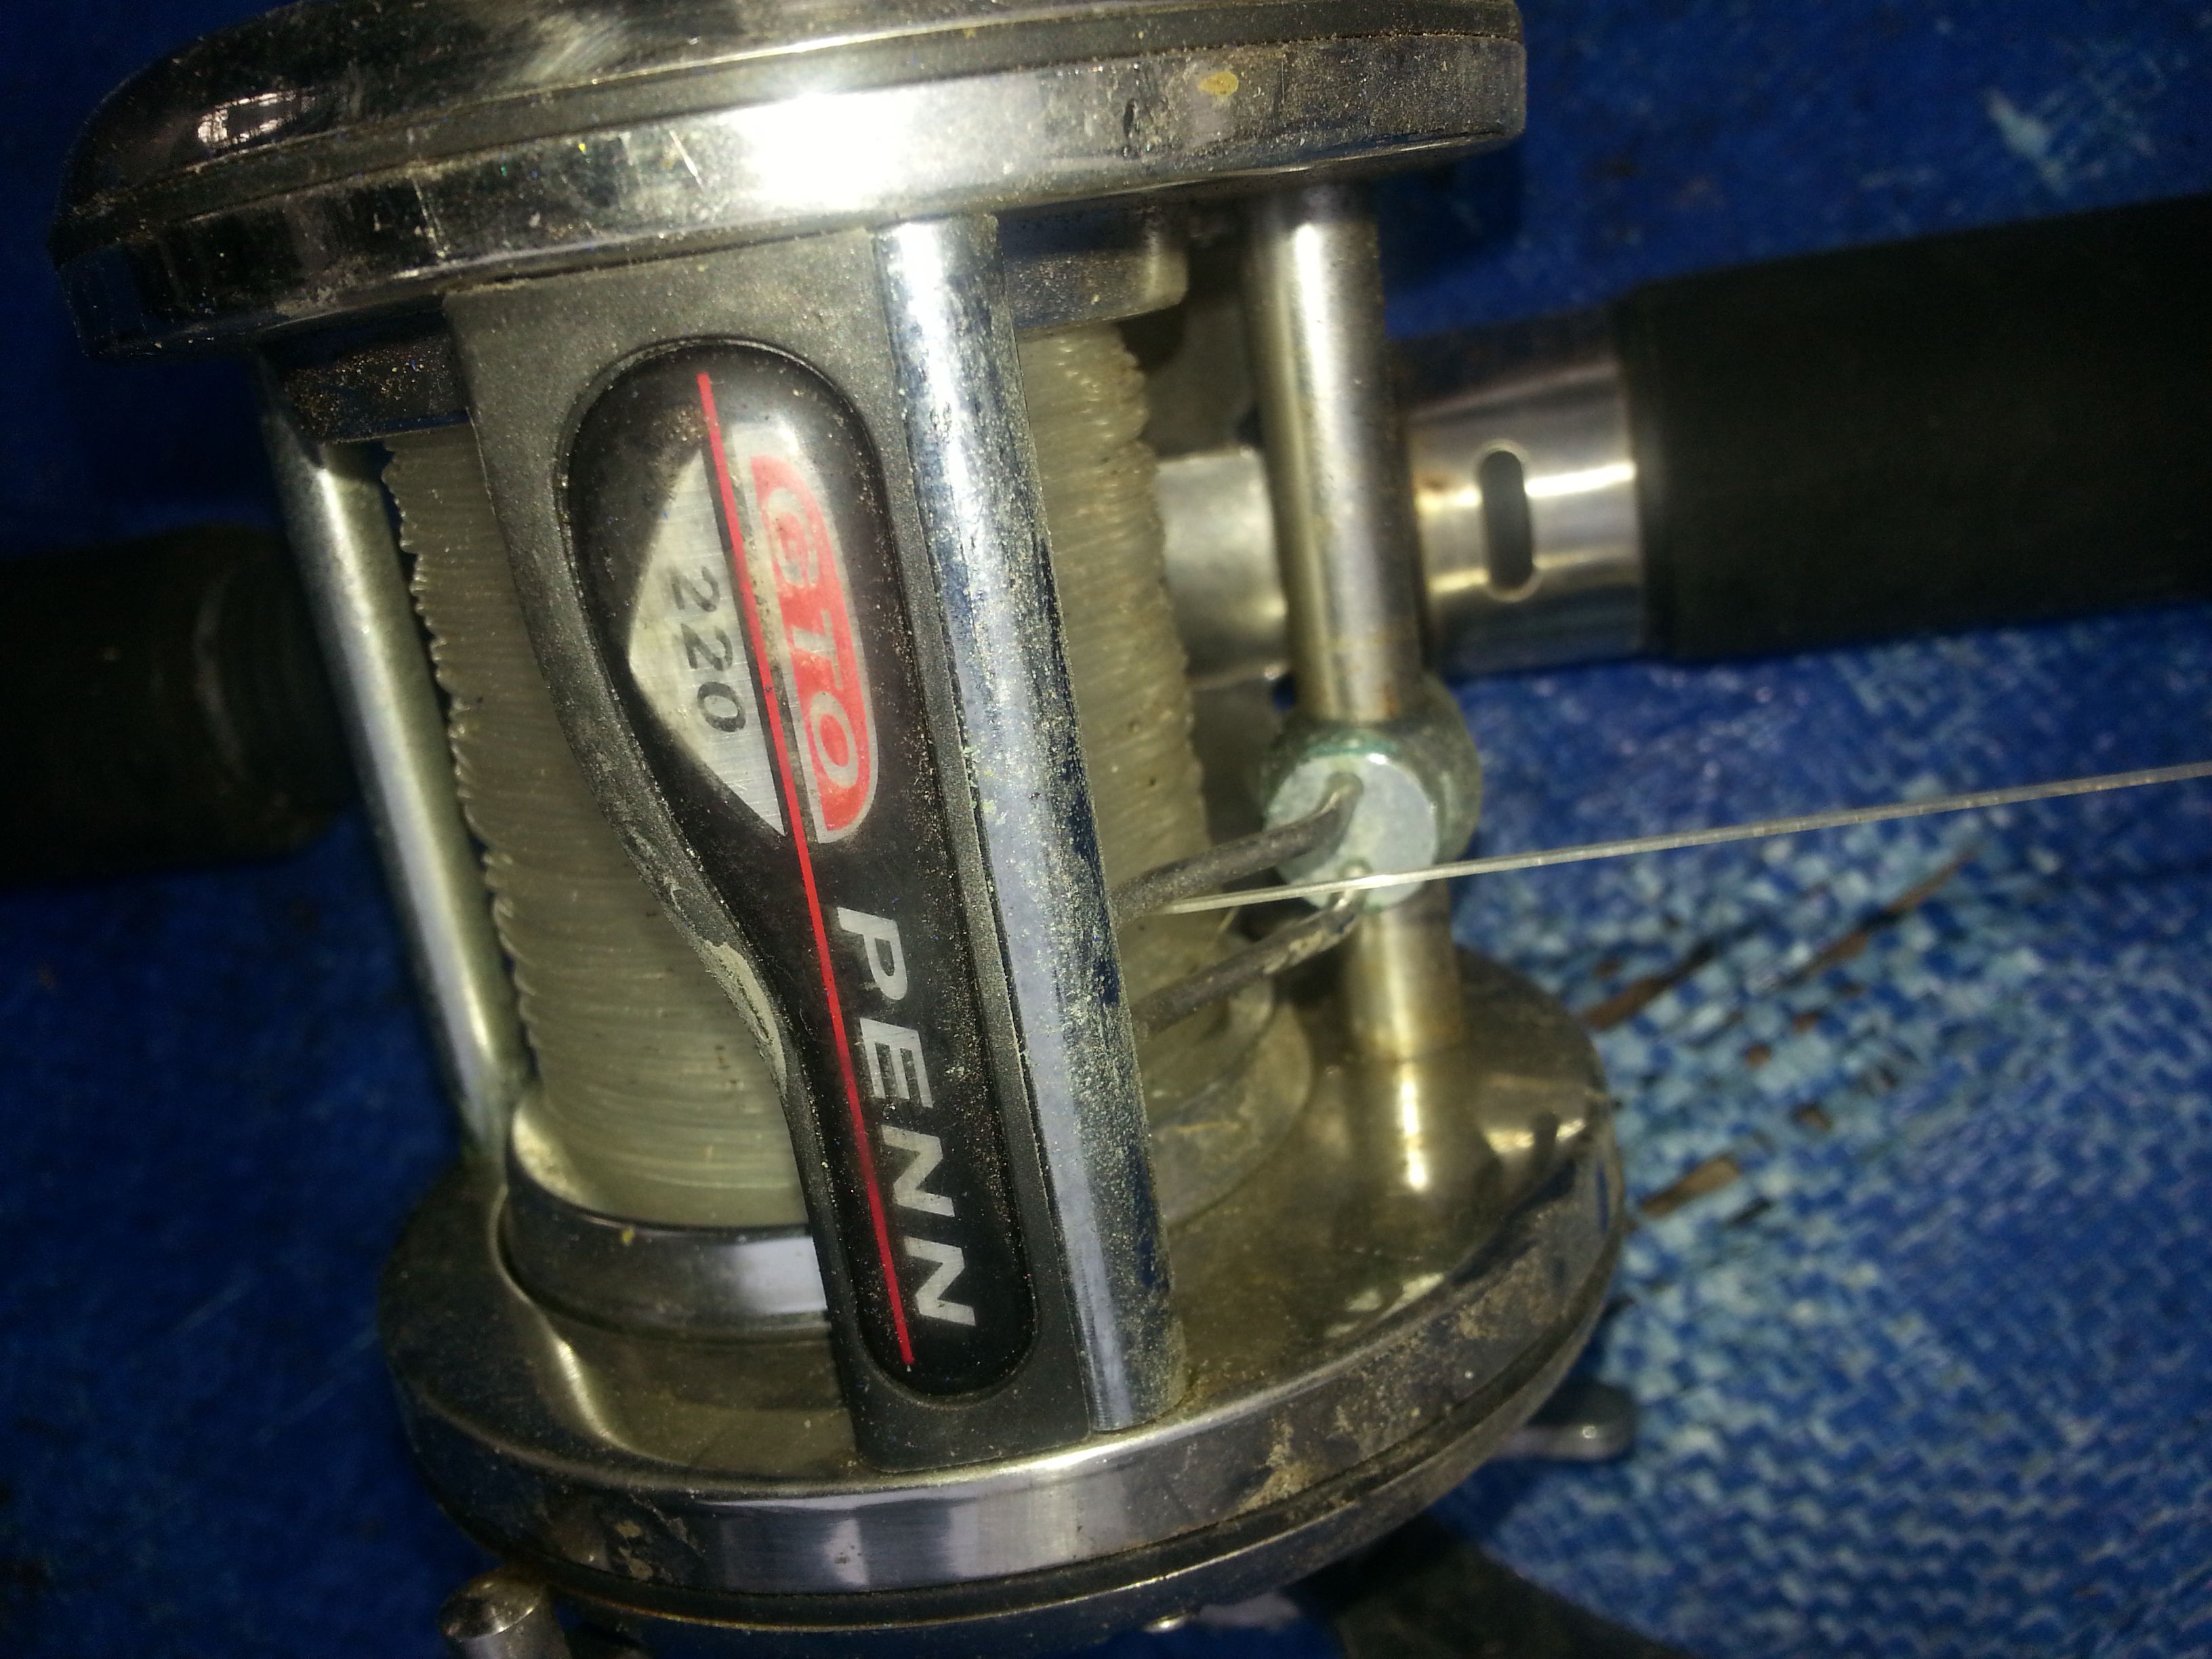 Fishing reel and rod